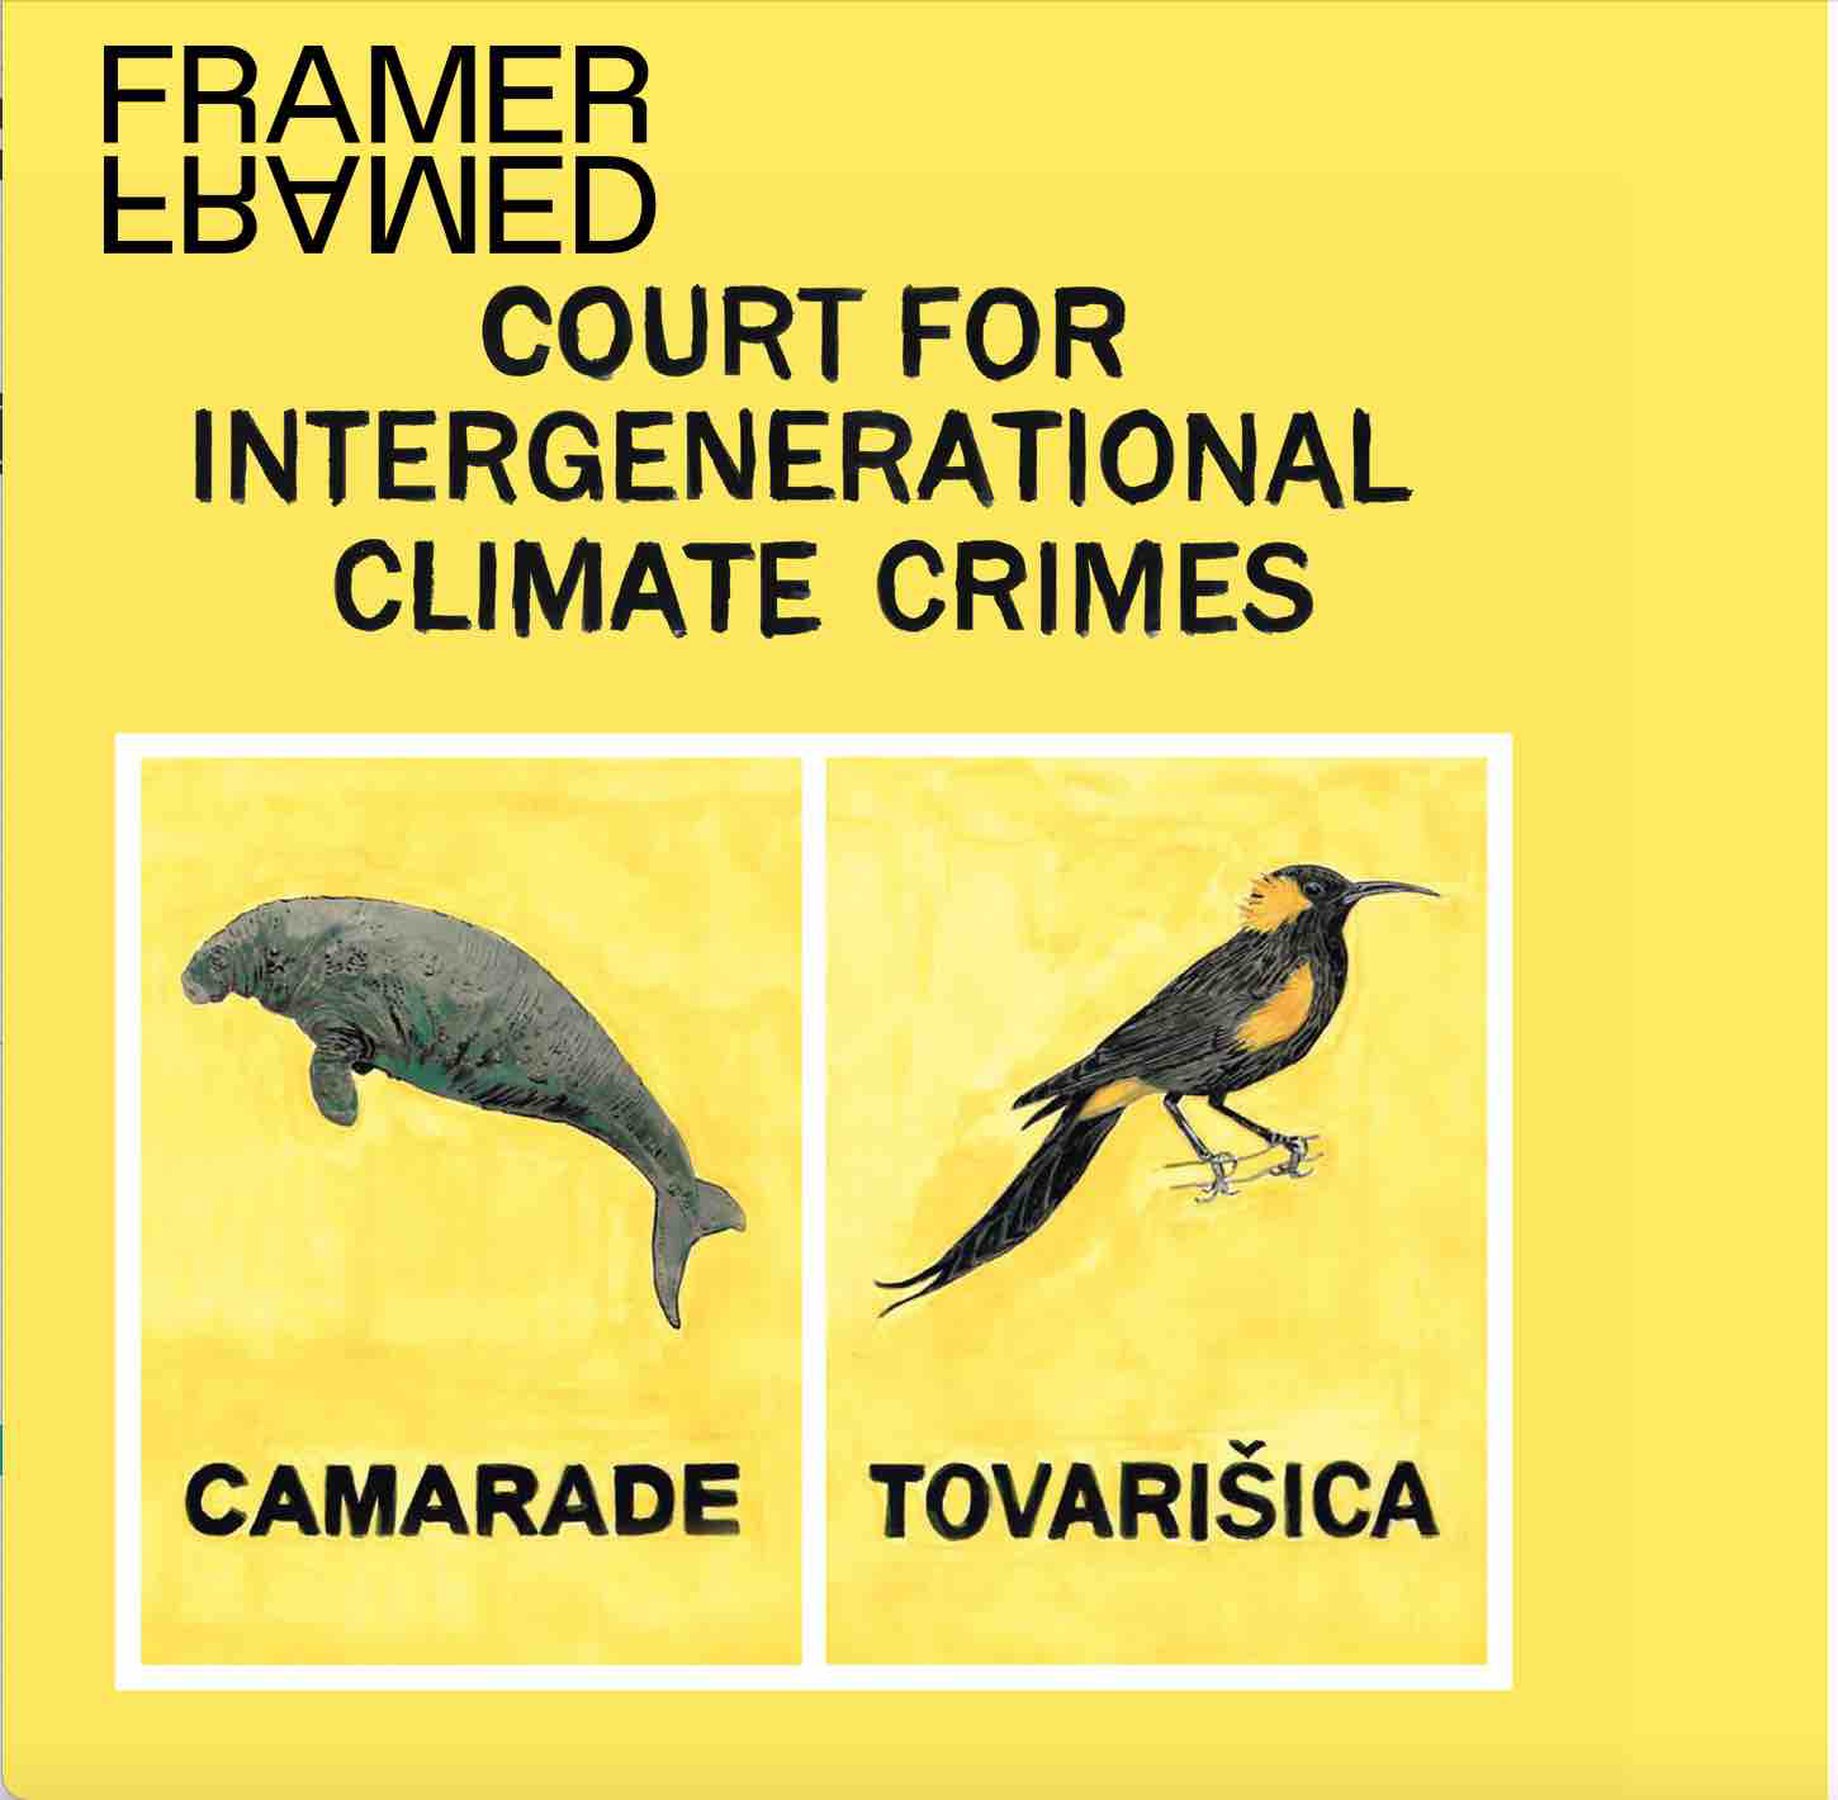 Court for Intergenerational Climate Crime